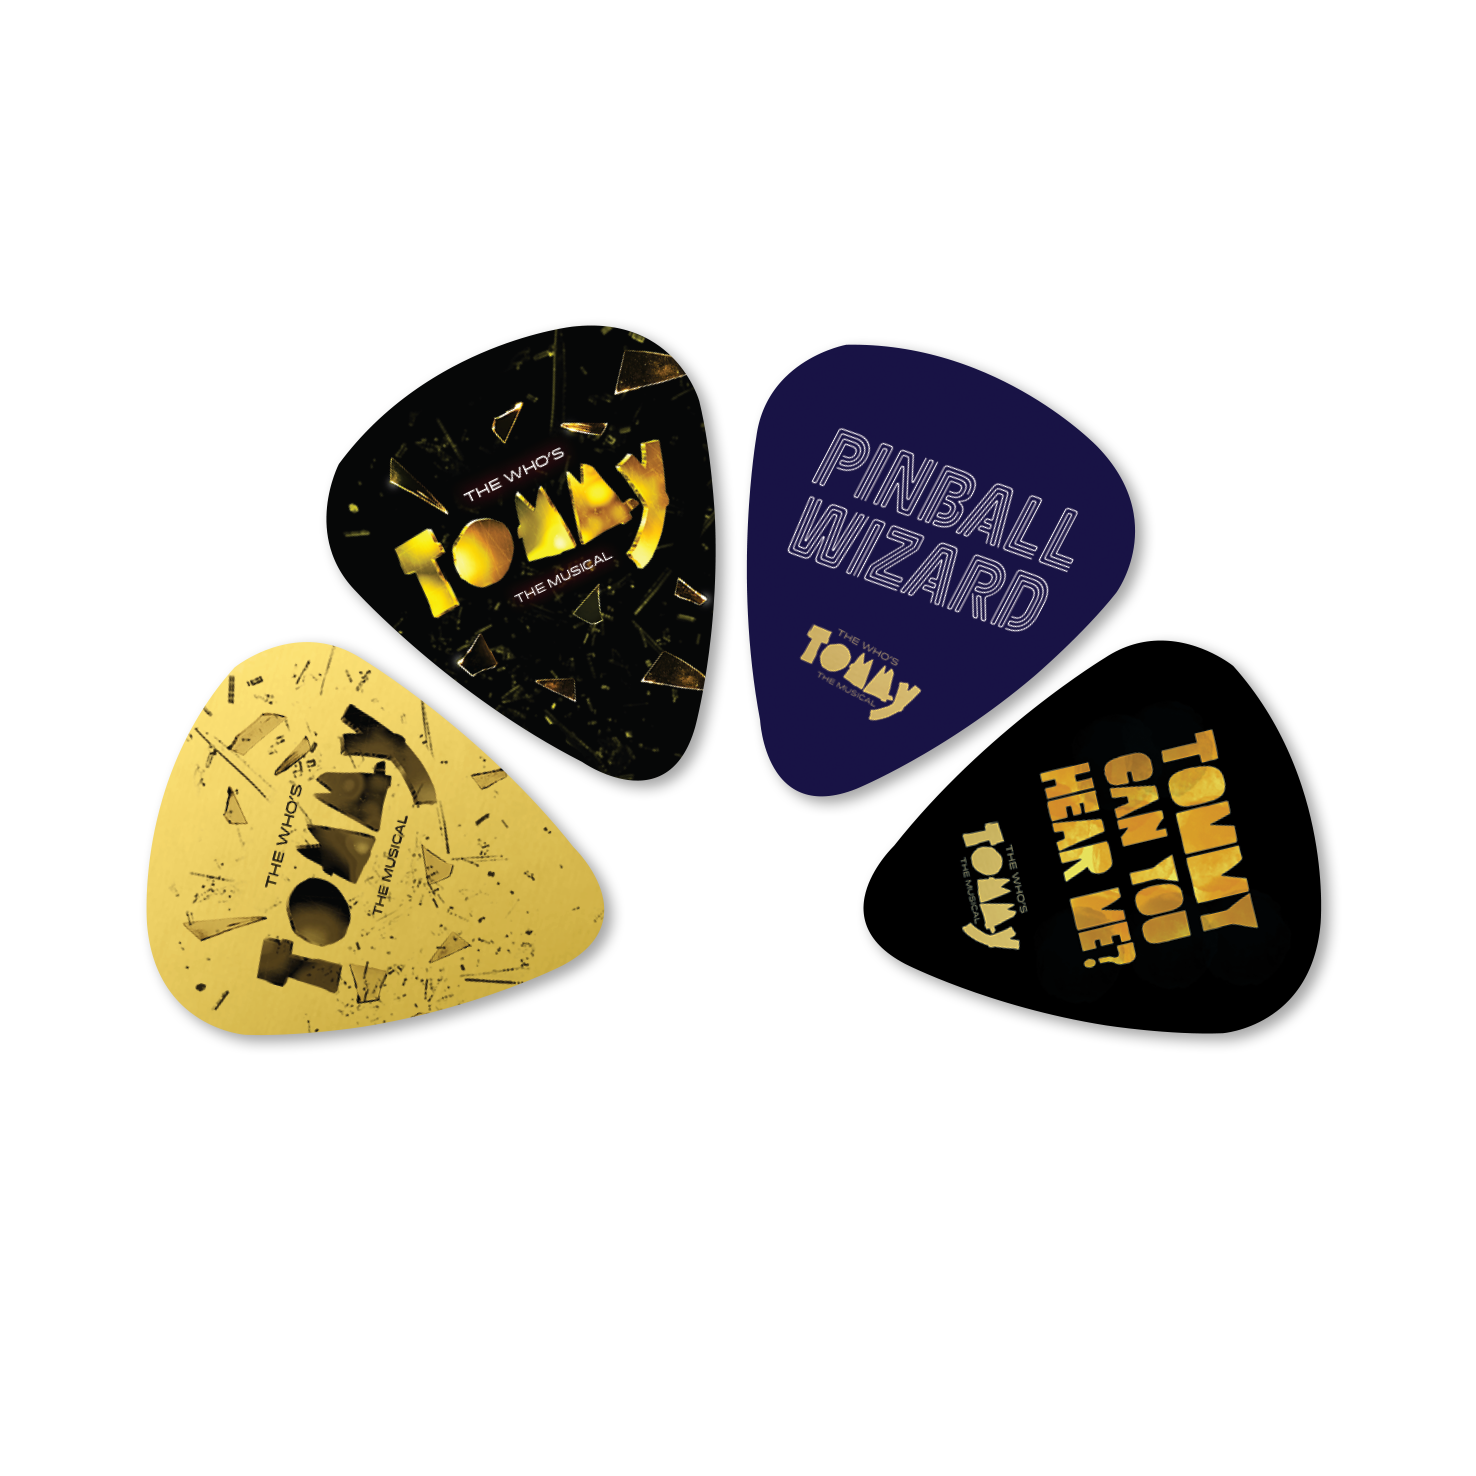 THE WHO'S TOMMY Guitar Pick Set Image